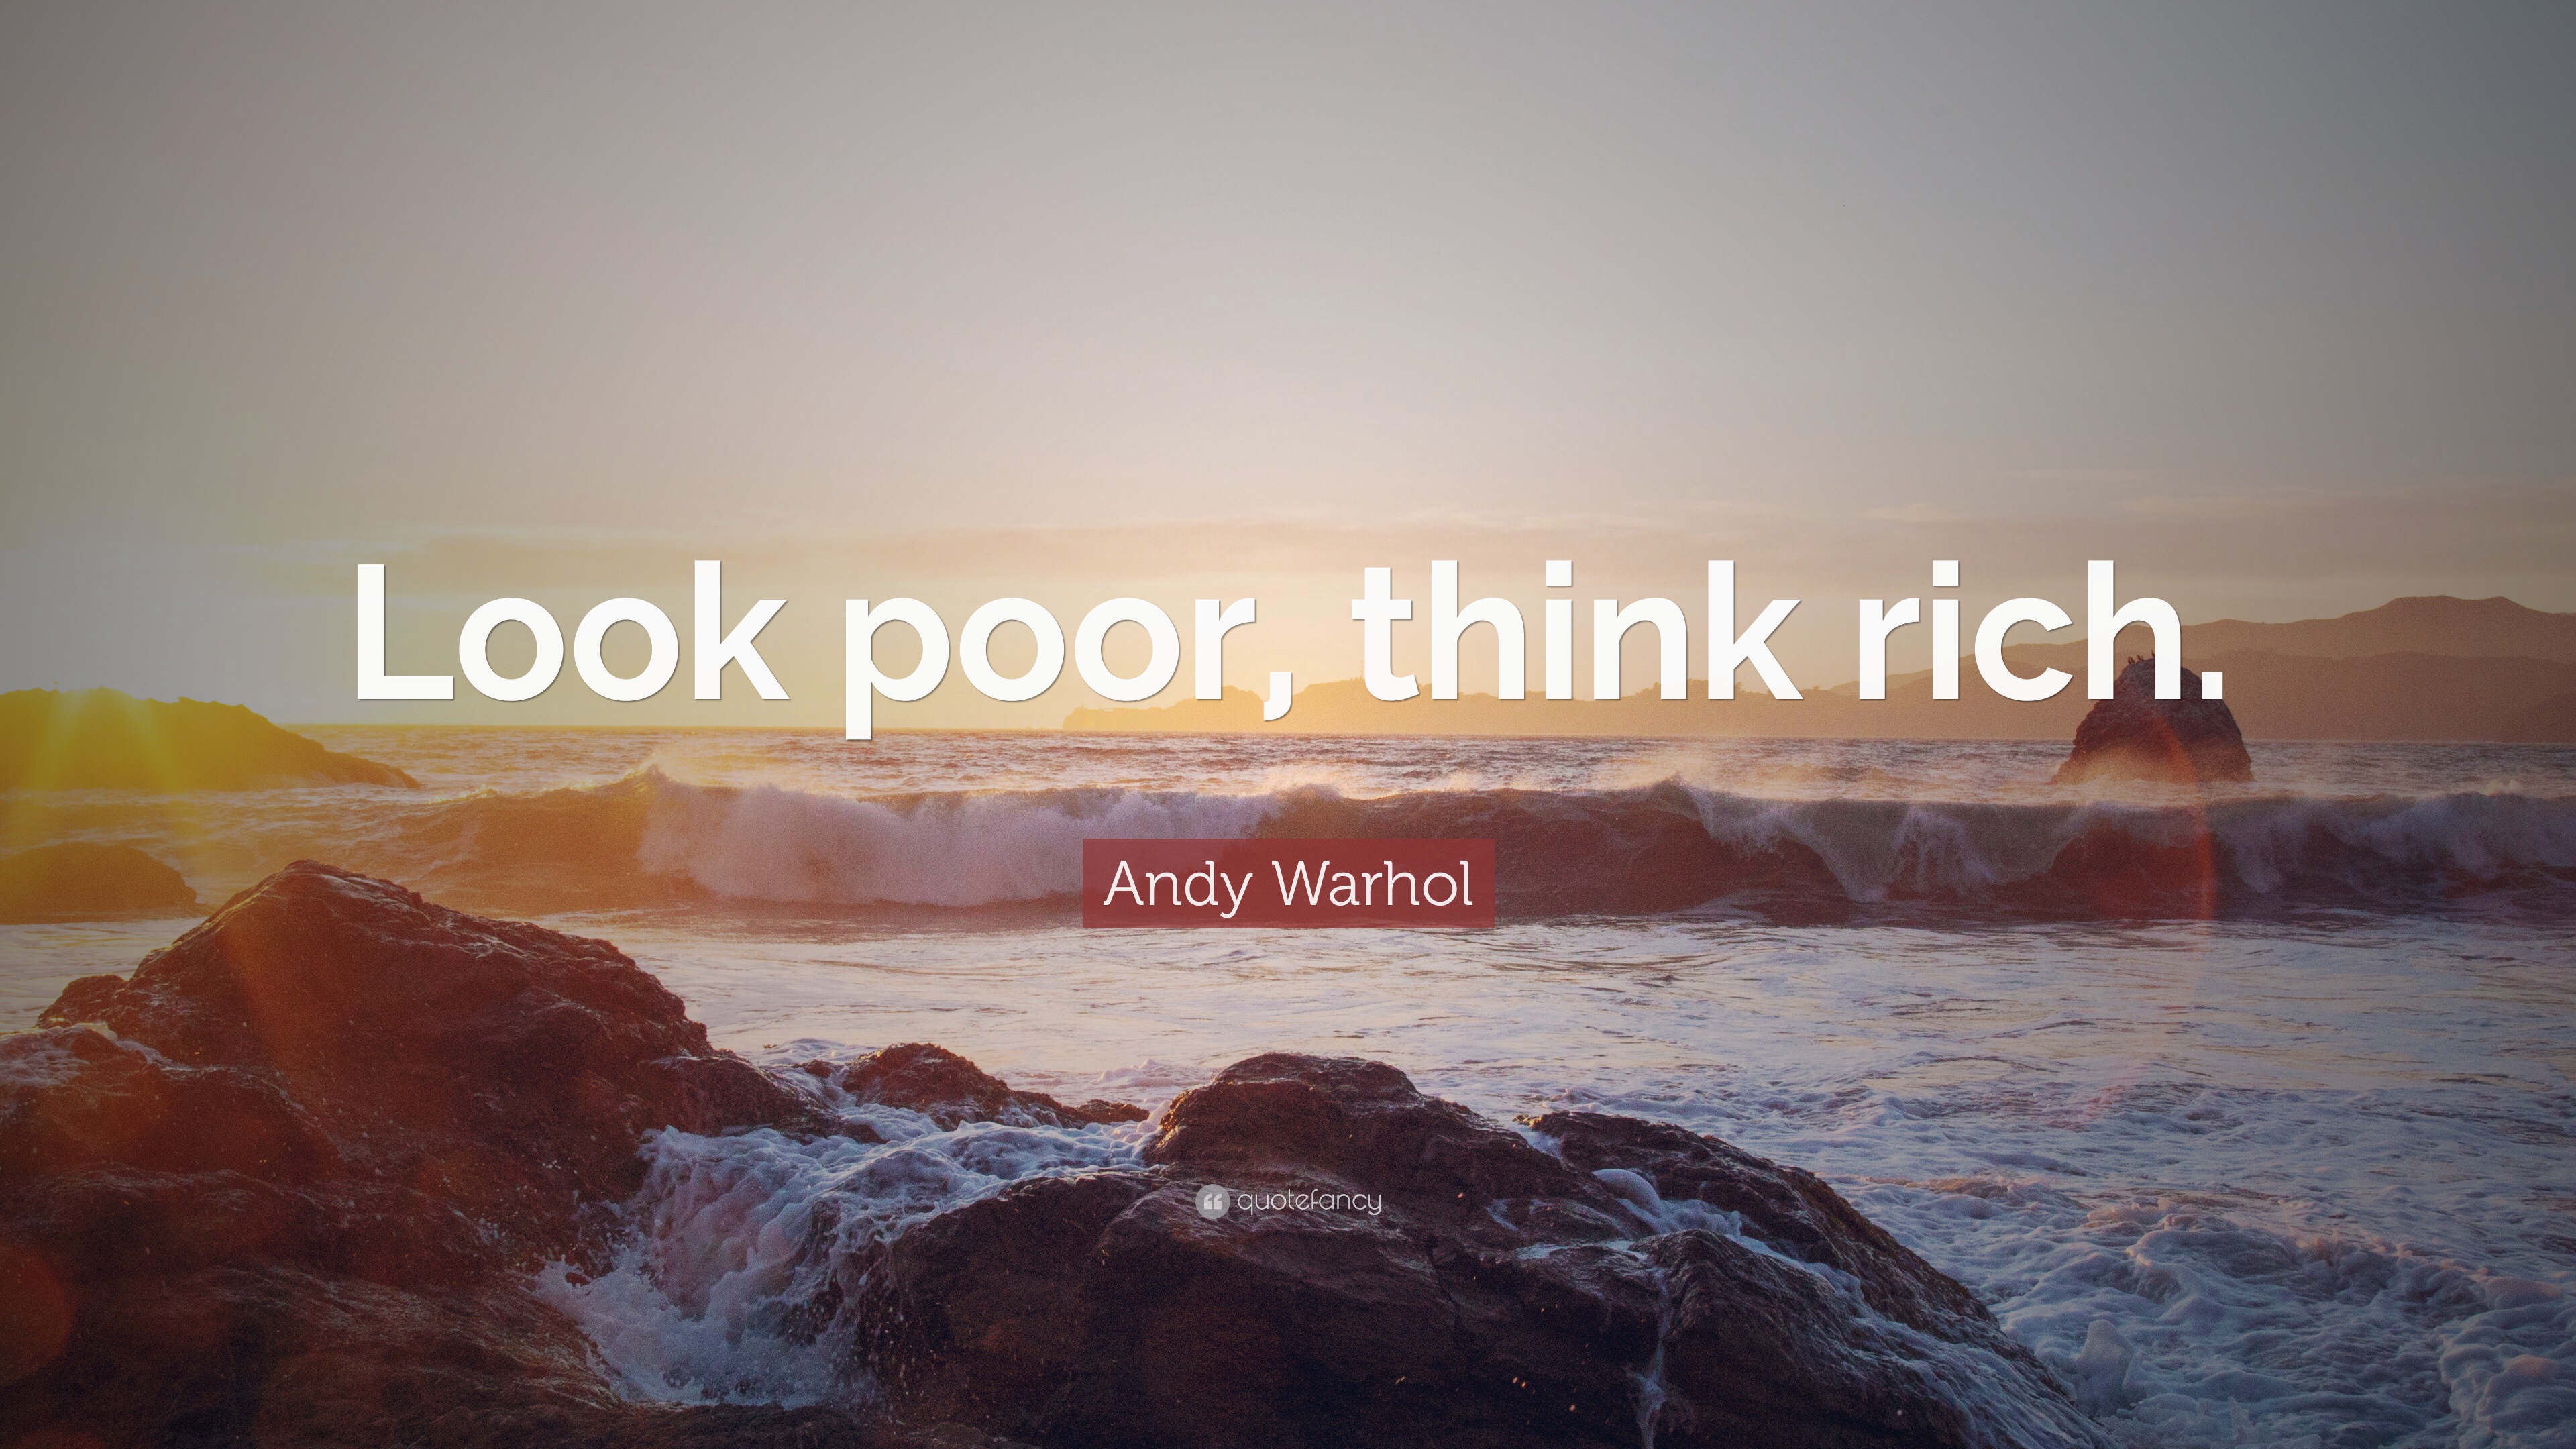 Andy Warhol Quote: “Look poor, think rich.” (12 wallpaper)